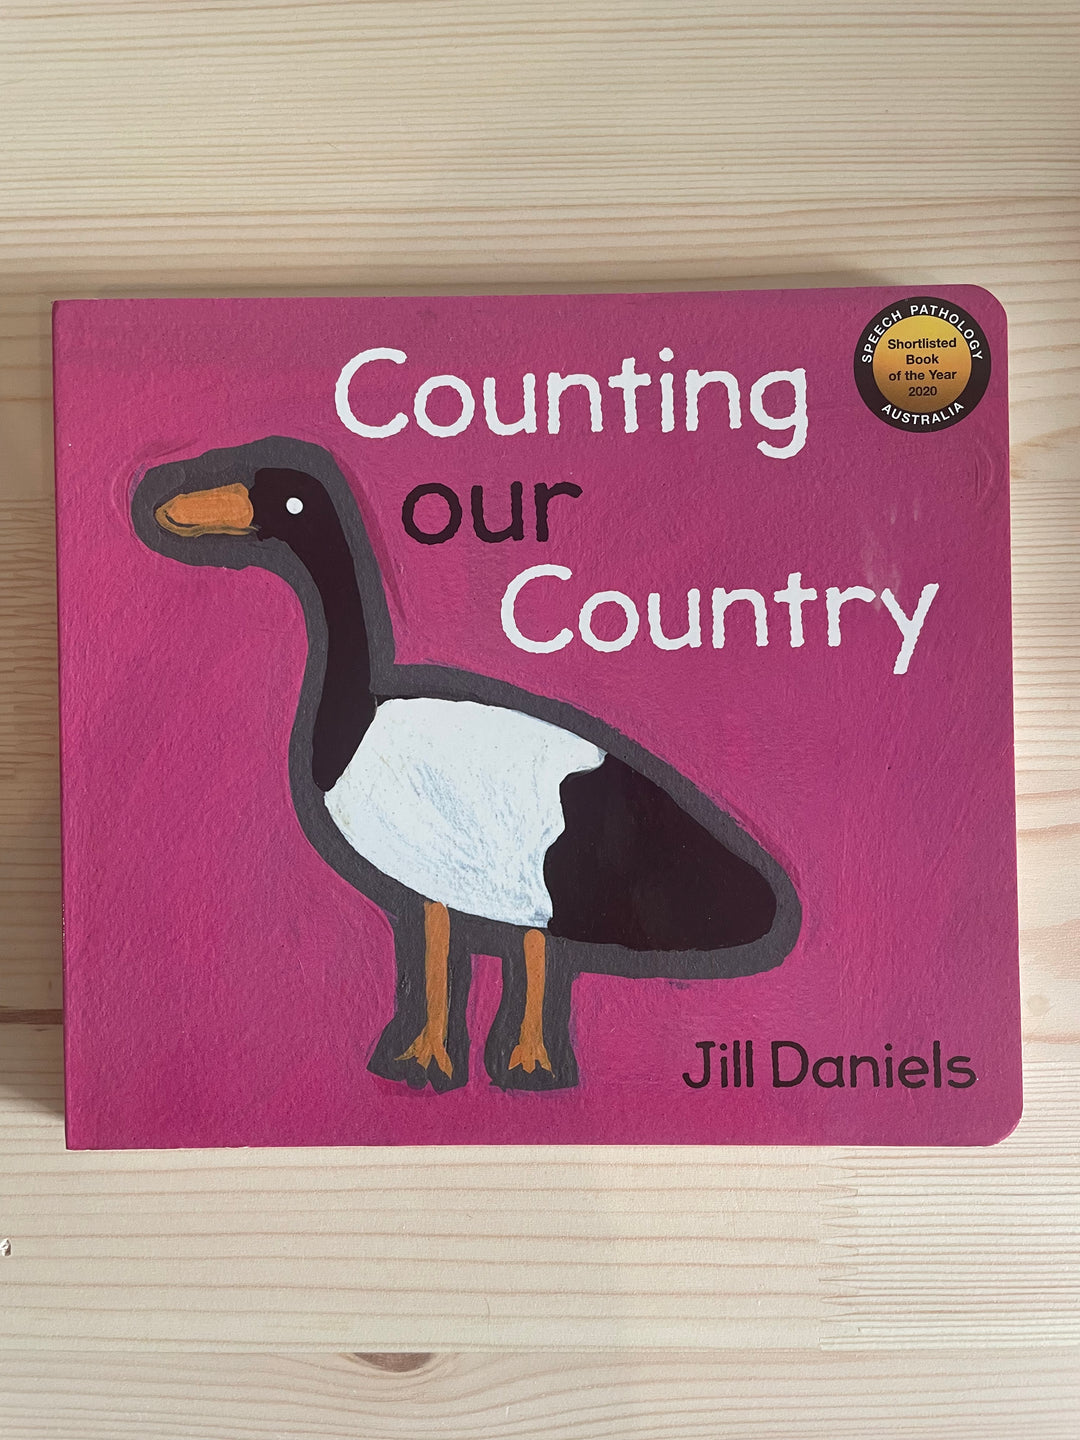 Counting our Country- Jill Daniels